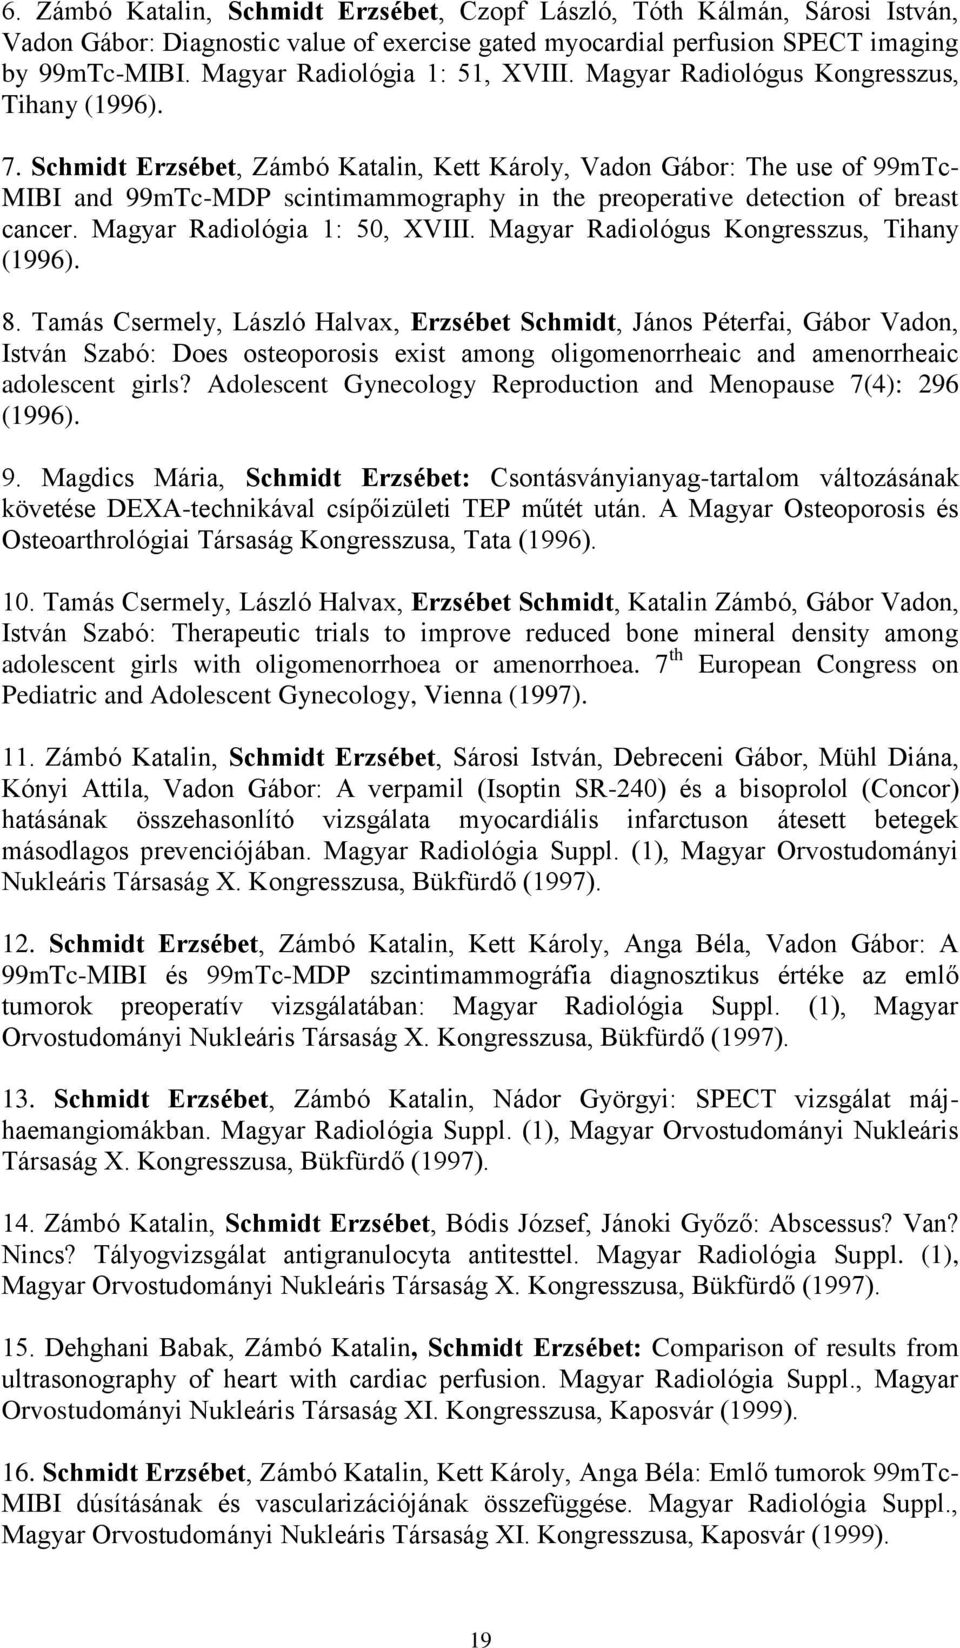 Schmidt Erzsébet, Zámbó Katalin, Kett Károly, Vadon Gábor: The use of 99mTc- MIBI and 99mTc-MDP scintimammography in the preoperative detection of breast cancer. Magyar Radiológia 1: 50, XVIII.